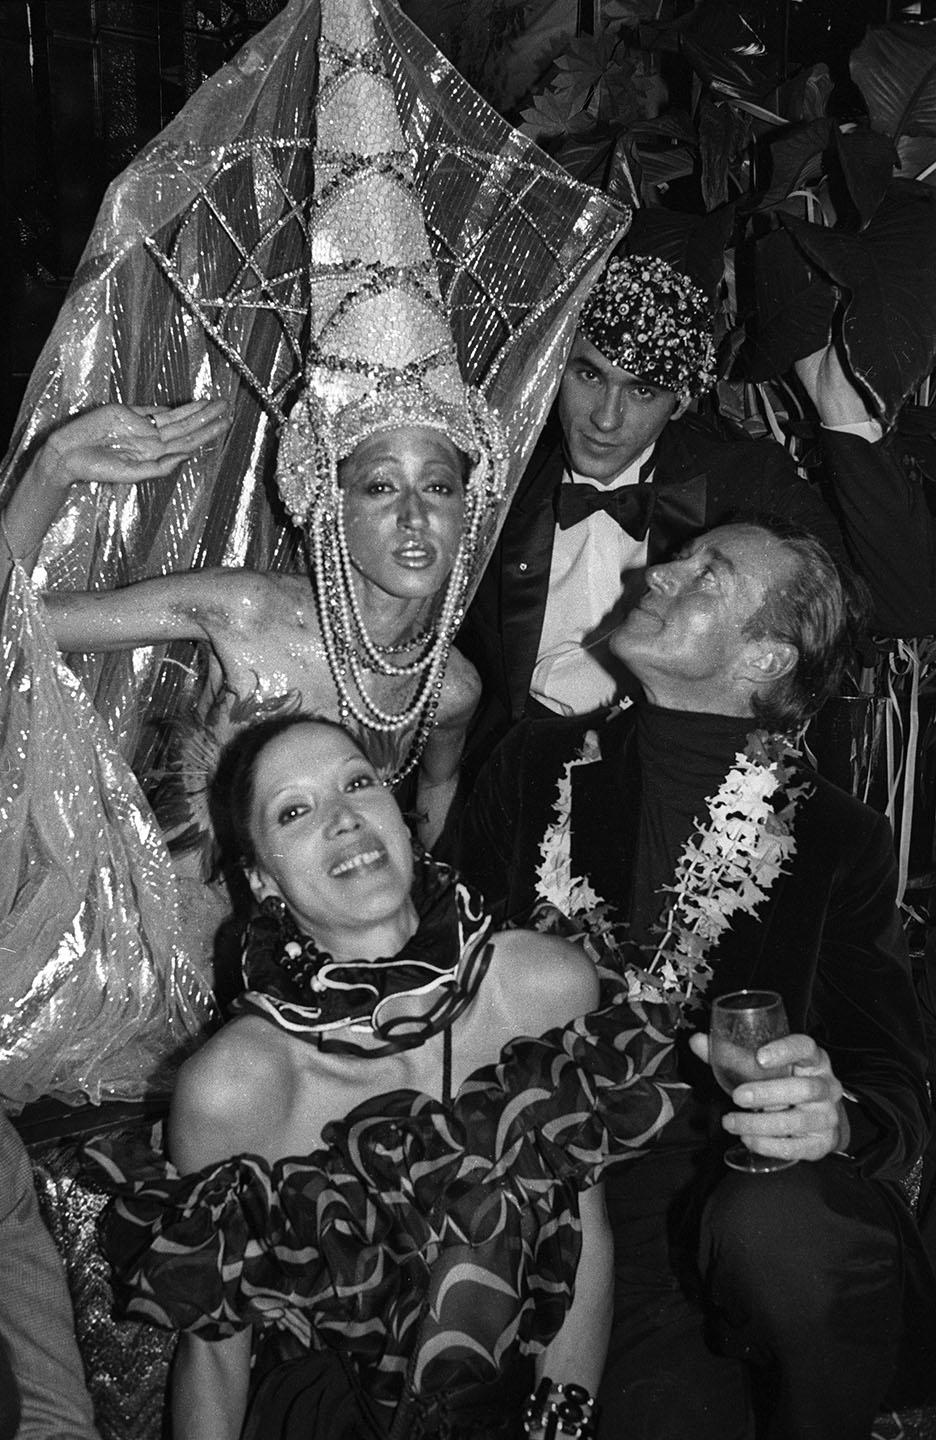 Model Pat Cleveland in costume with Halston, Martin Snaric, and Marina Schiano at Régine’s Rio Carnival party in New York on March 3, 1980. - Credit: Dustin Pittman/WWD